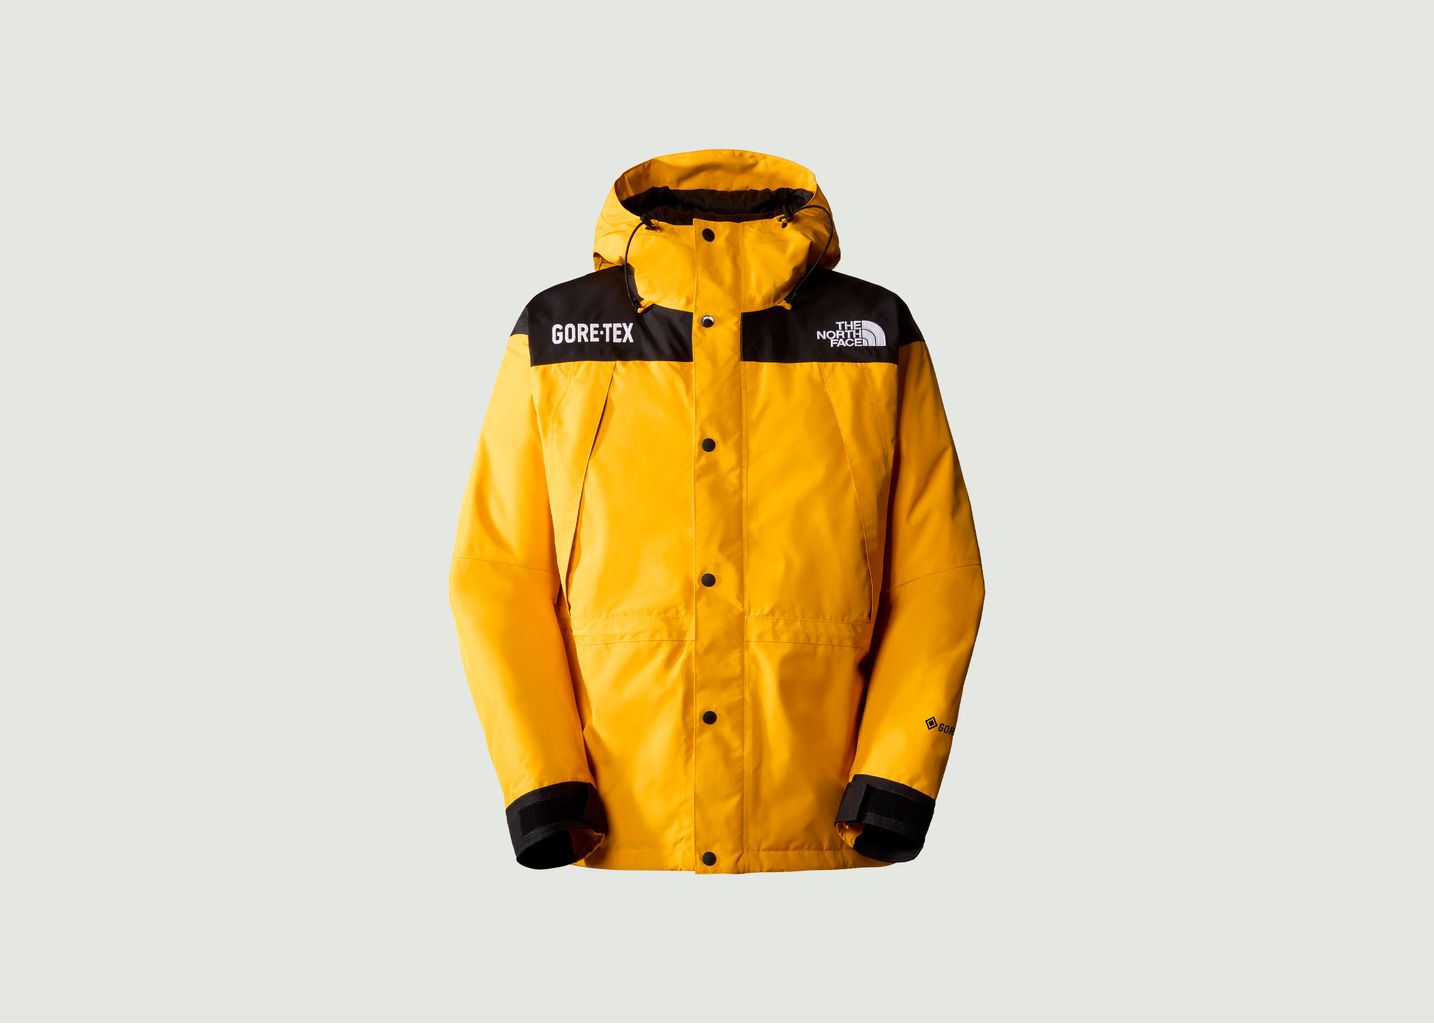 Gore-Tex waterproof jacket - The North Face